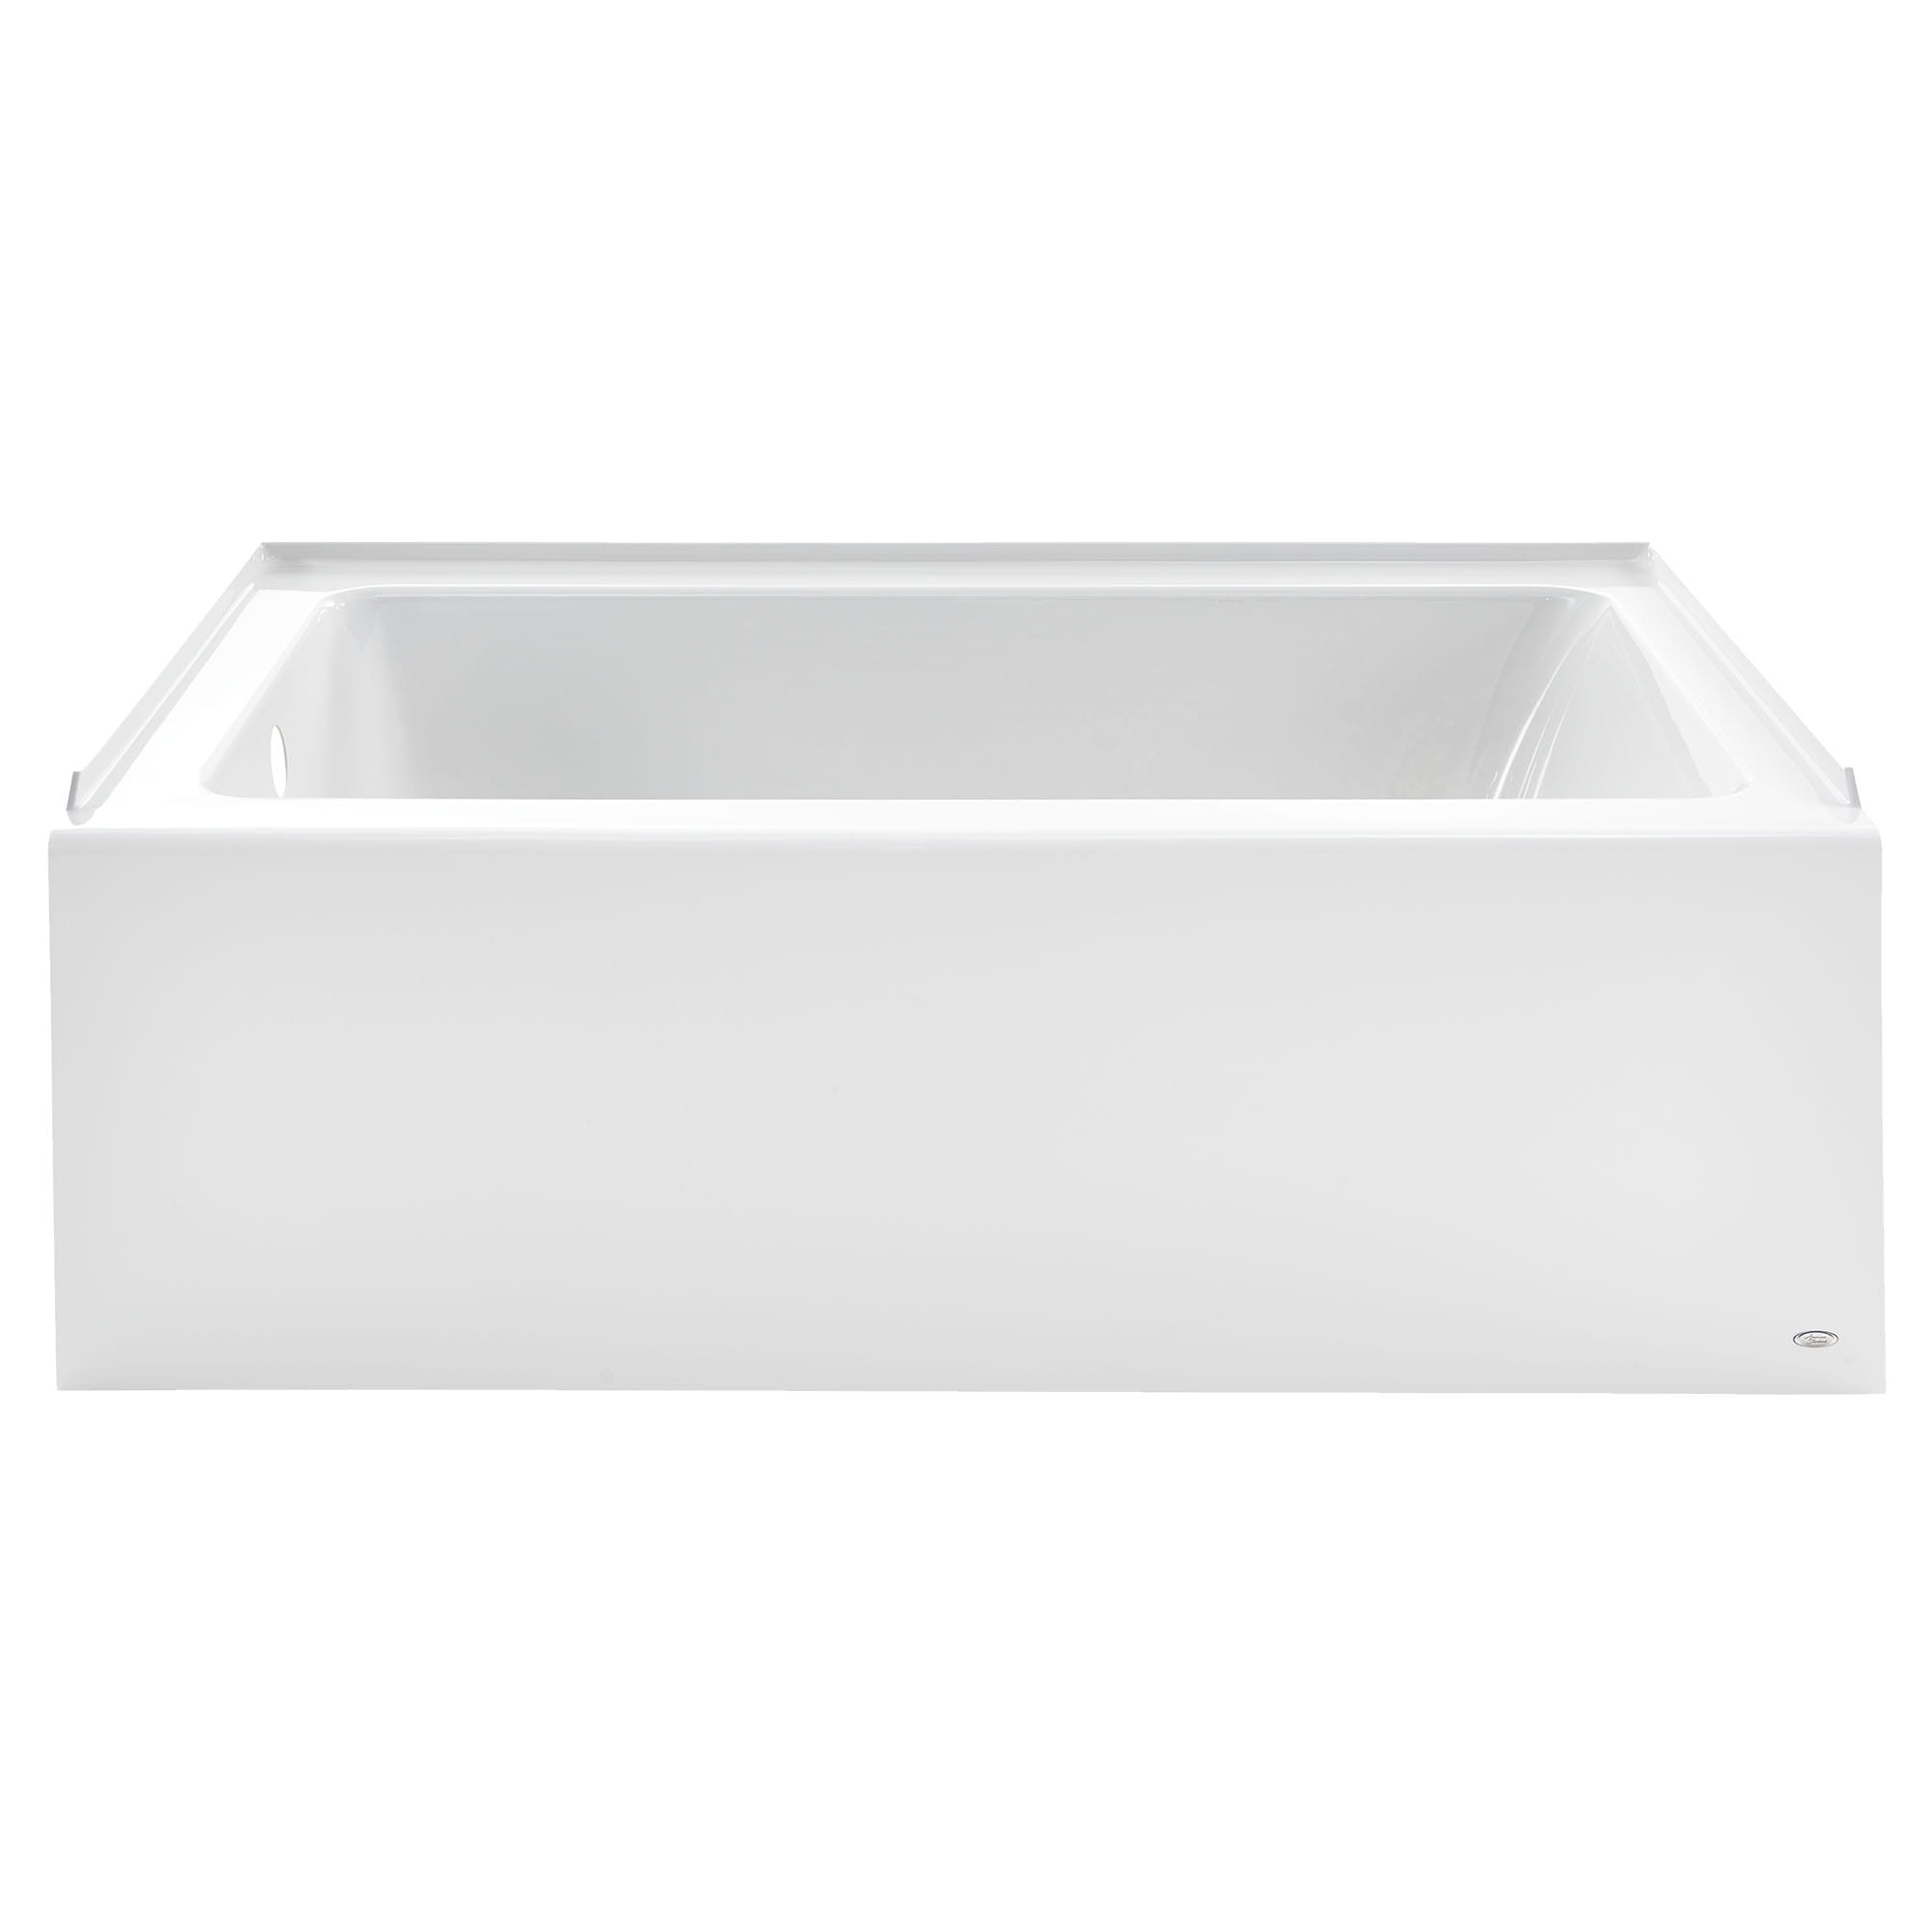 Studio 60 x 30 Inch Integral Apron Bathtub With Left Hand Outlet ARCTIC